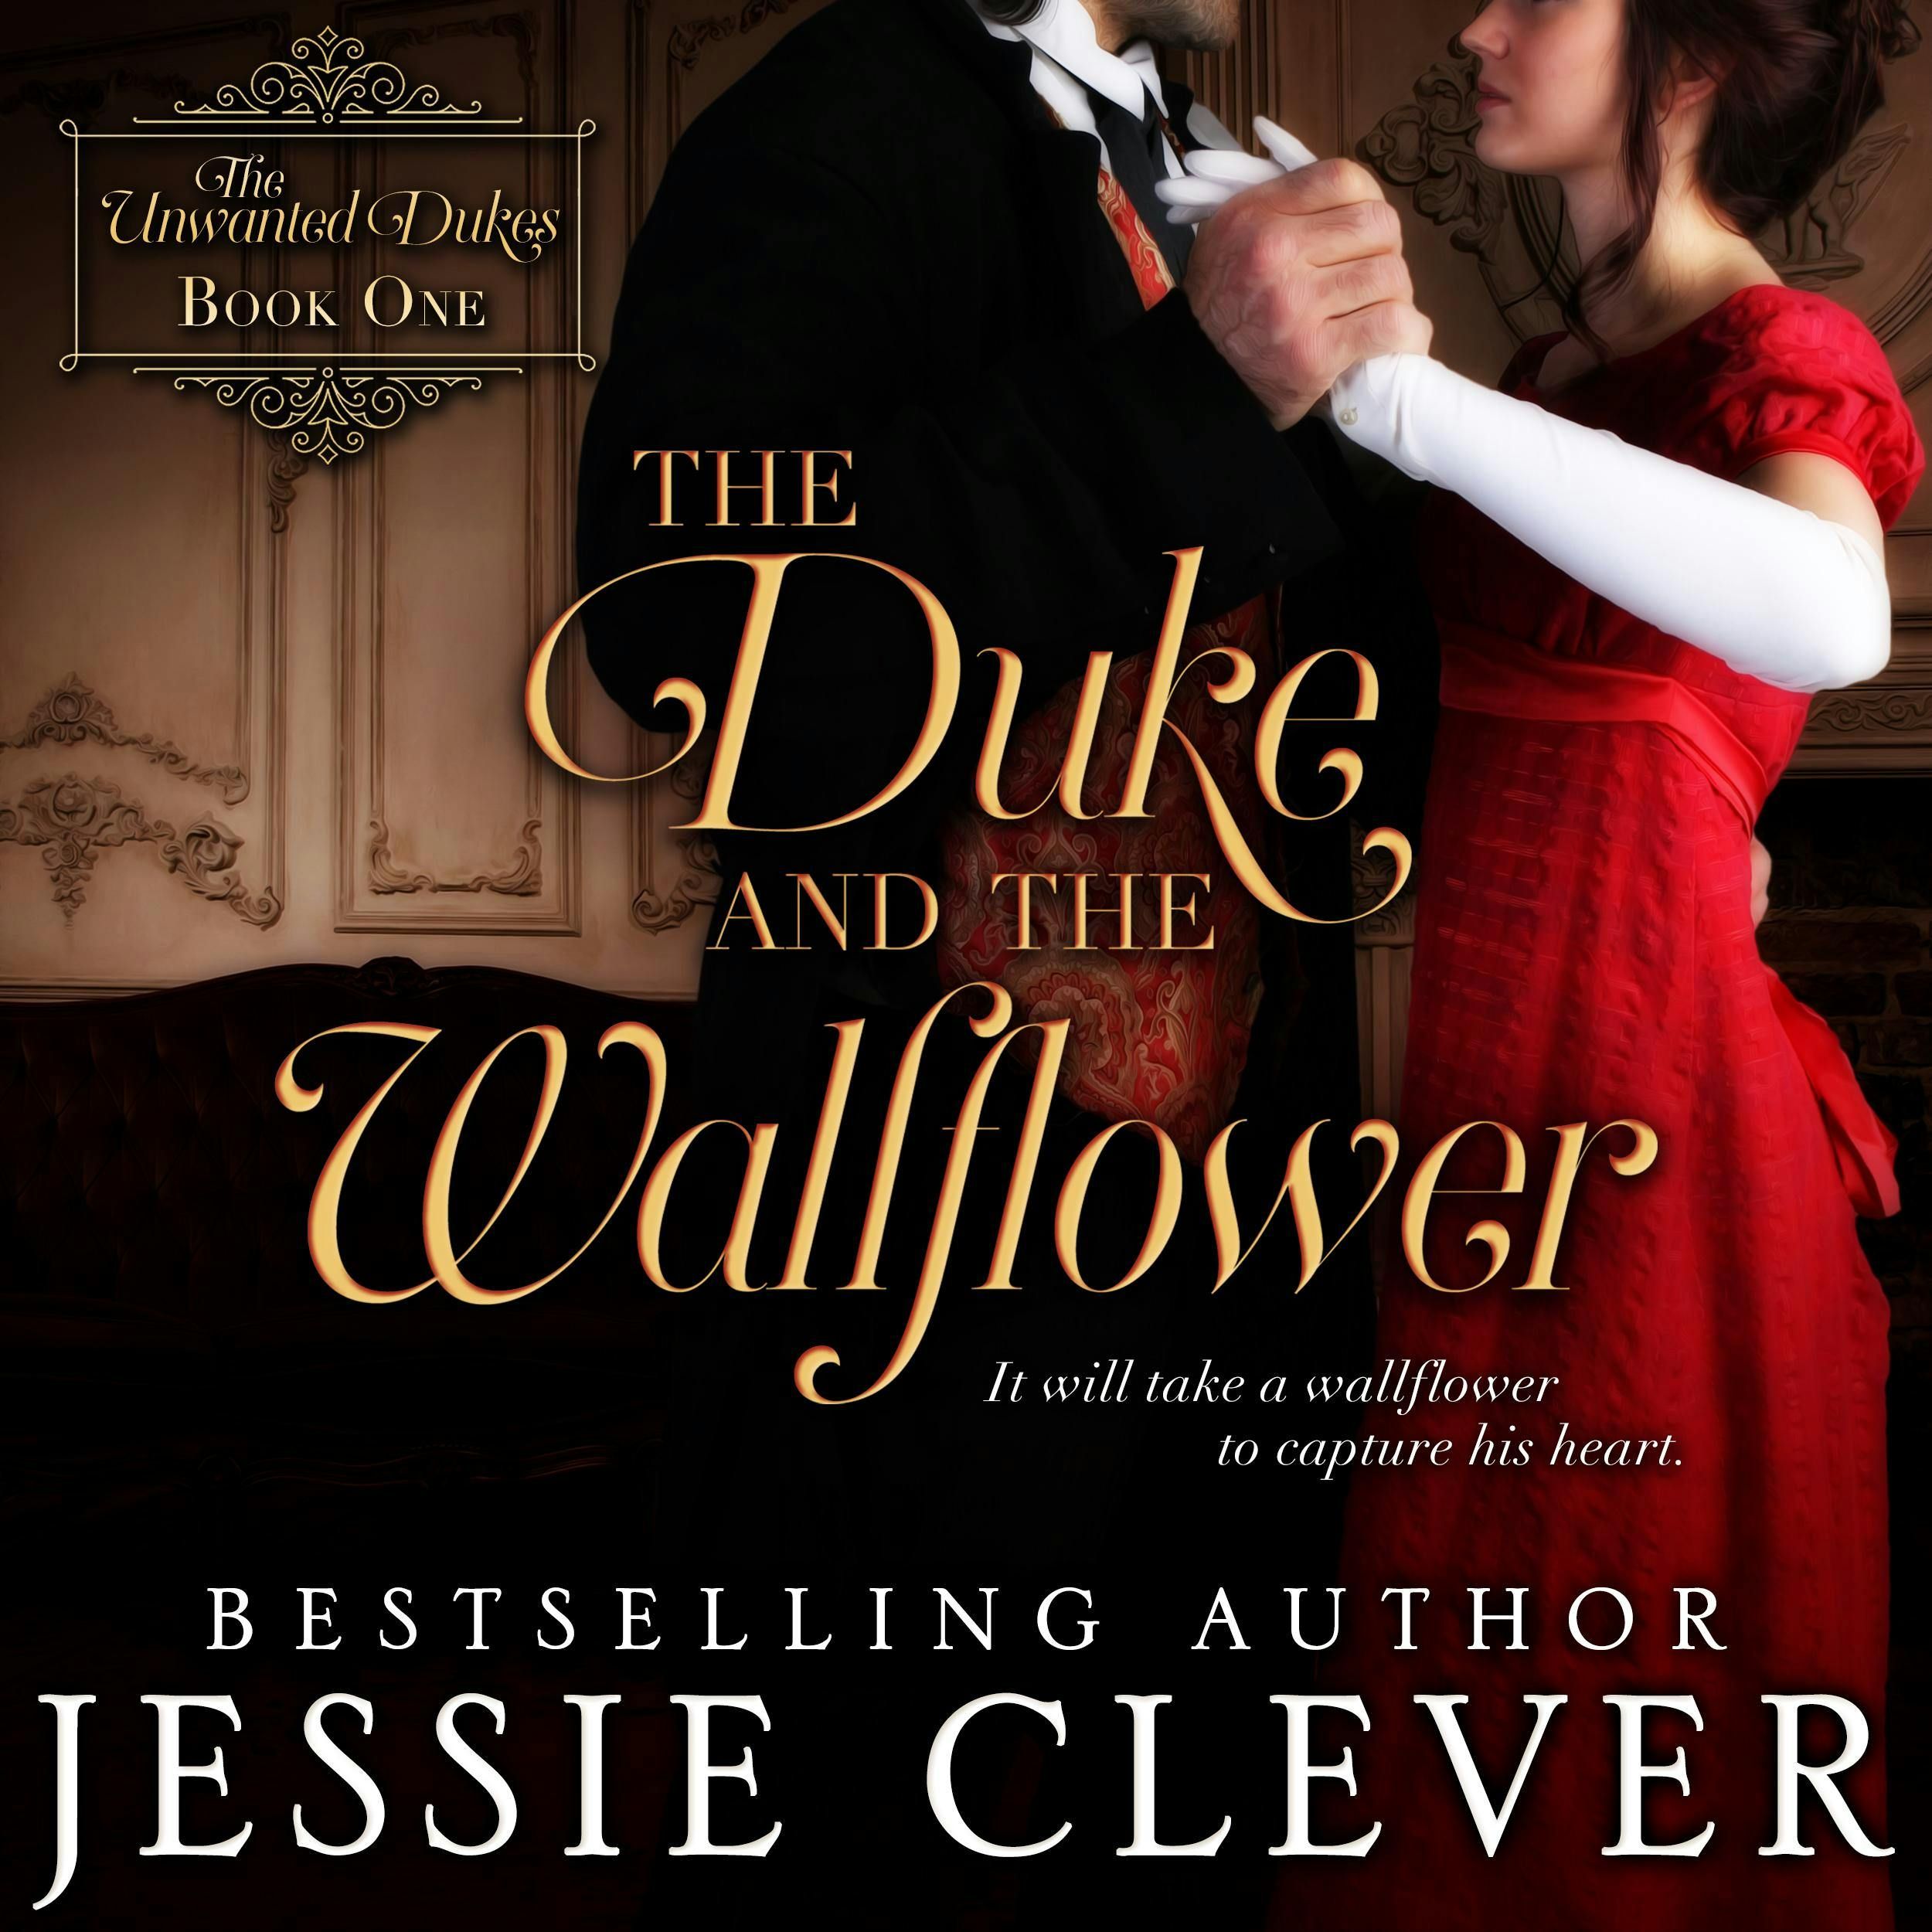 The Duke and the Wallflower - Jessie Clever